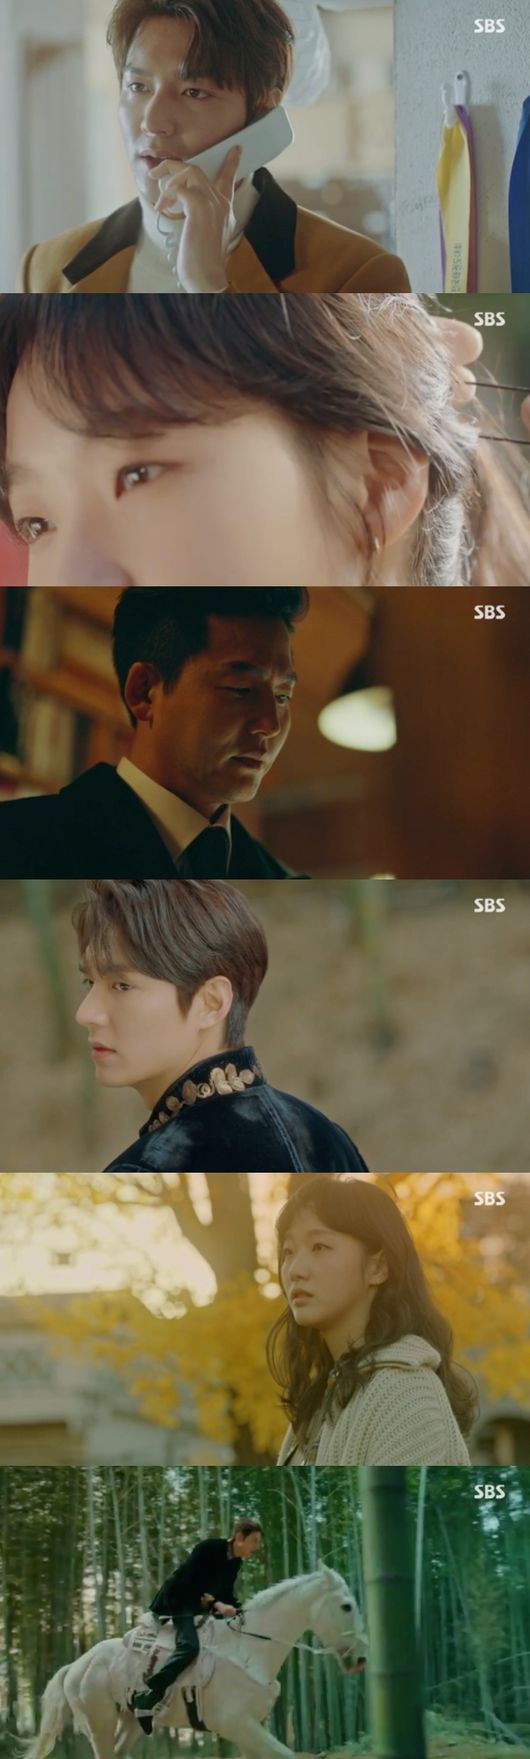 The King Lee Min-ho returned to the Korean Empire; Kim Go-eun felt the vacancies of Lee Min-ho and fell into complex subtle feelings.In SBSs Golden Earth Drama The King: The Lord of Eternity (played by Kim Eun-sook, directed by Baek Sang-hoon, and hereinafter, The King), which was broadcast on the 24th, Lee Min-ho gave a brief farewell to Jung Tae-eul (Kim Go-eun), and was shown returning to Korean Empire.Lee proposed to Jung Tae-eun, I will welcome you to my Empress. Then, Lee asked Jung Tae-euns Is it true? I left you a world.I do not know the bigger truth than that. But Jung Tae-euns reaction was cold.Jung Tae-eul still treated Igon as a psychopath, and demanded to see a parallel World. He headed for the bamboo forest with Jung Tae-eul.Jung Tae-eul left his seat, laughing at Egon.But Jung Tae-eul found that Egons words were not false. He could not find his ointment, nor his DNA.In addition, Maxi Iglesias was a precious breed horse of Spanish descent not seen in the country; there was no stolen fact either.Jung Tae-eul, in confusion, called out Igon. Jung Tae-eul drank in a mixed mood and asked, Are you from a really different World?So, Igon noticed that Jung Tae-eul had searched his DNA but did not achieve much.Jeong Tae-eul asked Lee who could cross the parallel world.Its a hypothesis yet, but I think there is one more person besides me, he said. I can tell you only if I become a member of the imperial family.I want your Earth to be rounded up soon, he said to Jung Tae, who keeps on guarding and suspicious.He had been in the World longer than he had thought, and had an unexpected side effect, and he was struggling with his shoulder every time a lightning strike hit.Jung Tae-eul was in trouble when the car stopped suddenly while heading to the scene. Jung Tae-eul called his father, Jung Do-in (played by Jeon Bae-su), but his opponent was Lee Gon.Jung Tae-eun recalled the fact that Igon was a science department and asked for help.He had another experience of the side effects of the World: the time of all things stopped, except himself. He tried to tie his head, but looked at the hardness.I think its probably a kind of side effect that crossed the door, so I saw something beautiful, Igon told Jung Tae-eul, who returned to the flowing time.He realized that the key and lock were the key to dimension, and that half of the key was to him, and the rest to Irim.Igon speculated that Irim was still alive and went to and from parallel World.Igon decided to return to the Korean Empire, where he told Jung Tae-eul, I am the emperor of my country. I was too empty.I did not want to go, he said. Jung Tae-eul did not respond much.Jung Tae-eul had a hunch that the real Igon had left after returning home, and Jeong Tae-eul had an unexplained look and expressed his longing for Igon.After changing into the emperors uniform, Igon took the Maxi Iglesias to the Korean Empire.At the same time, Lee Lim (Lee Jung-jin) returned to Korean Empire. And he found his loyalist Yoo Kyung-moo (Lee Hae-young).Irim reunited with his subordinates who had joined the will, adding tension to future development.Capture the broadcast screen of The King